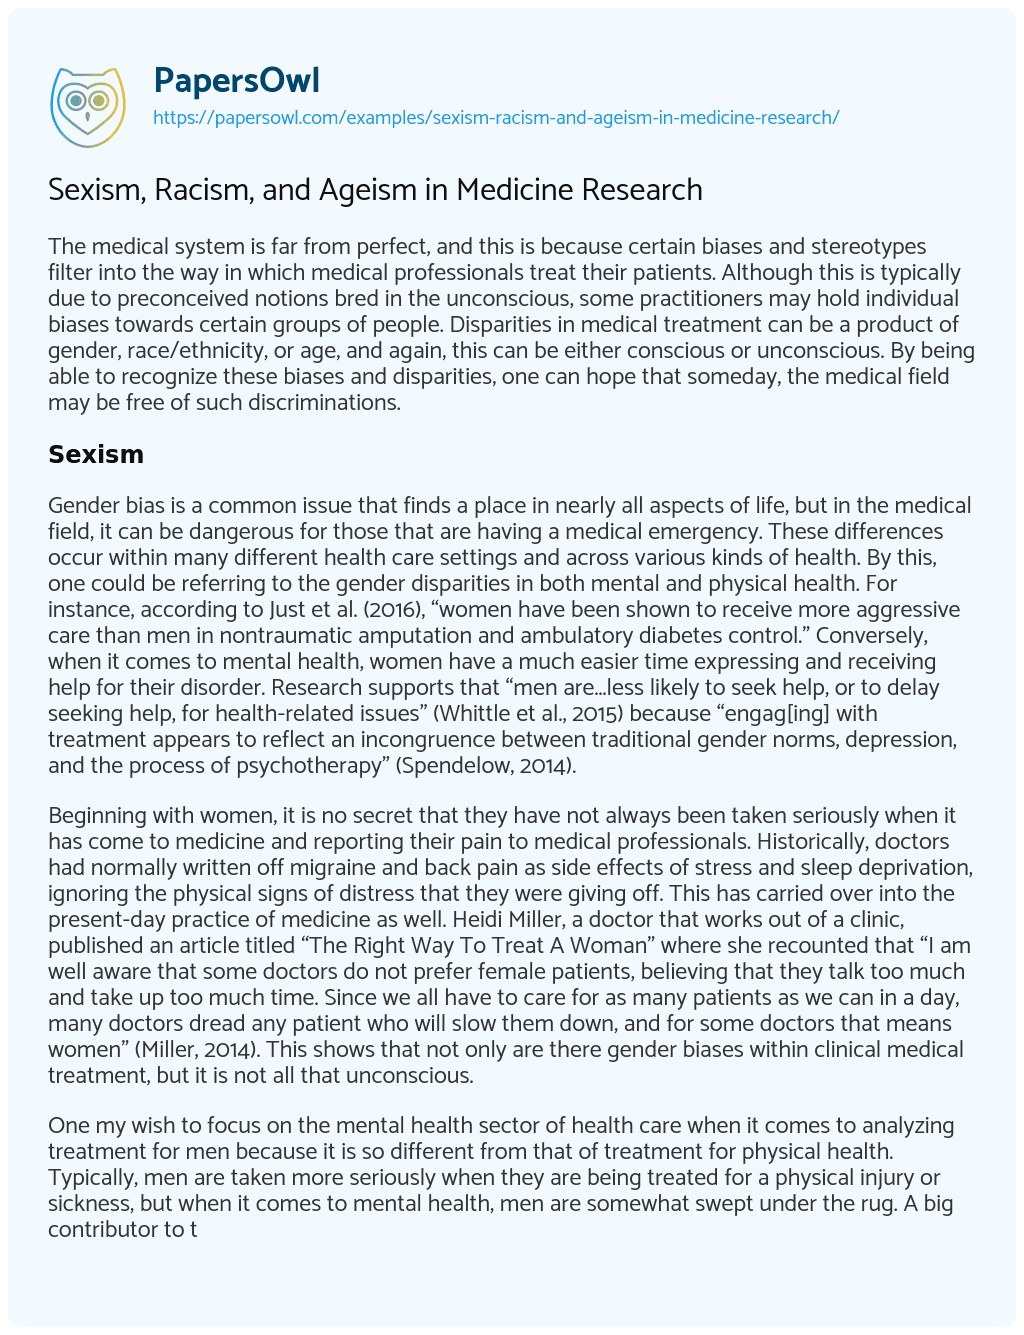 Essay on Sexism, Racism, and Ageism in Medicine Research